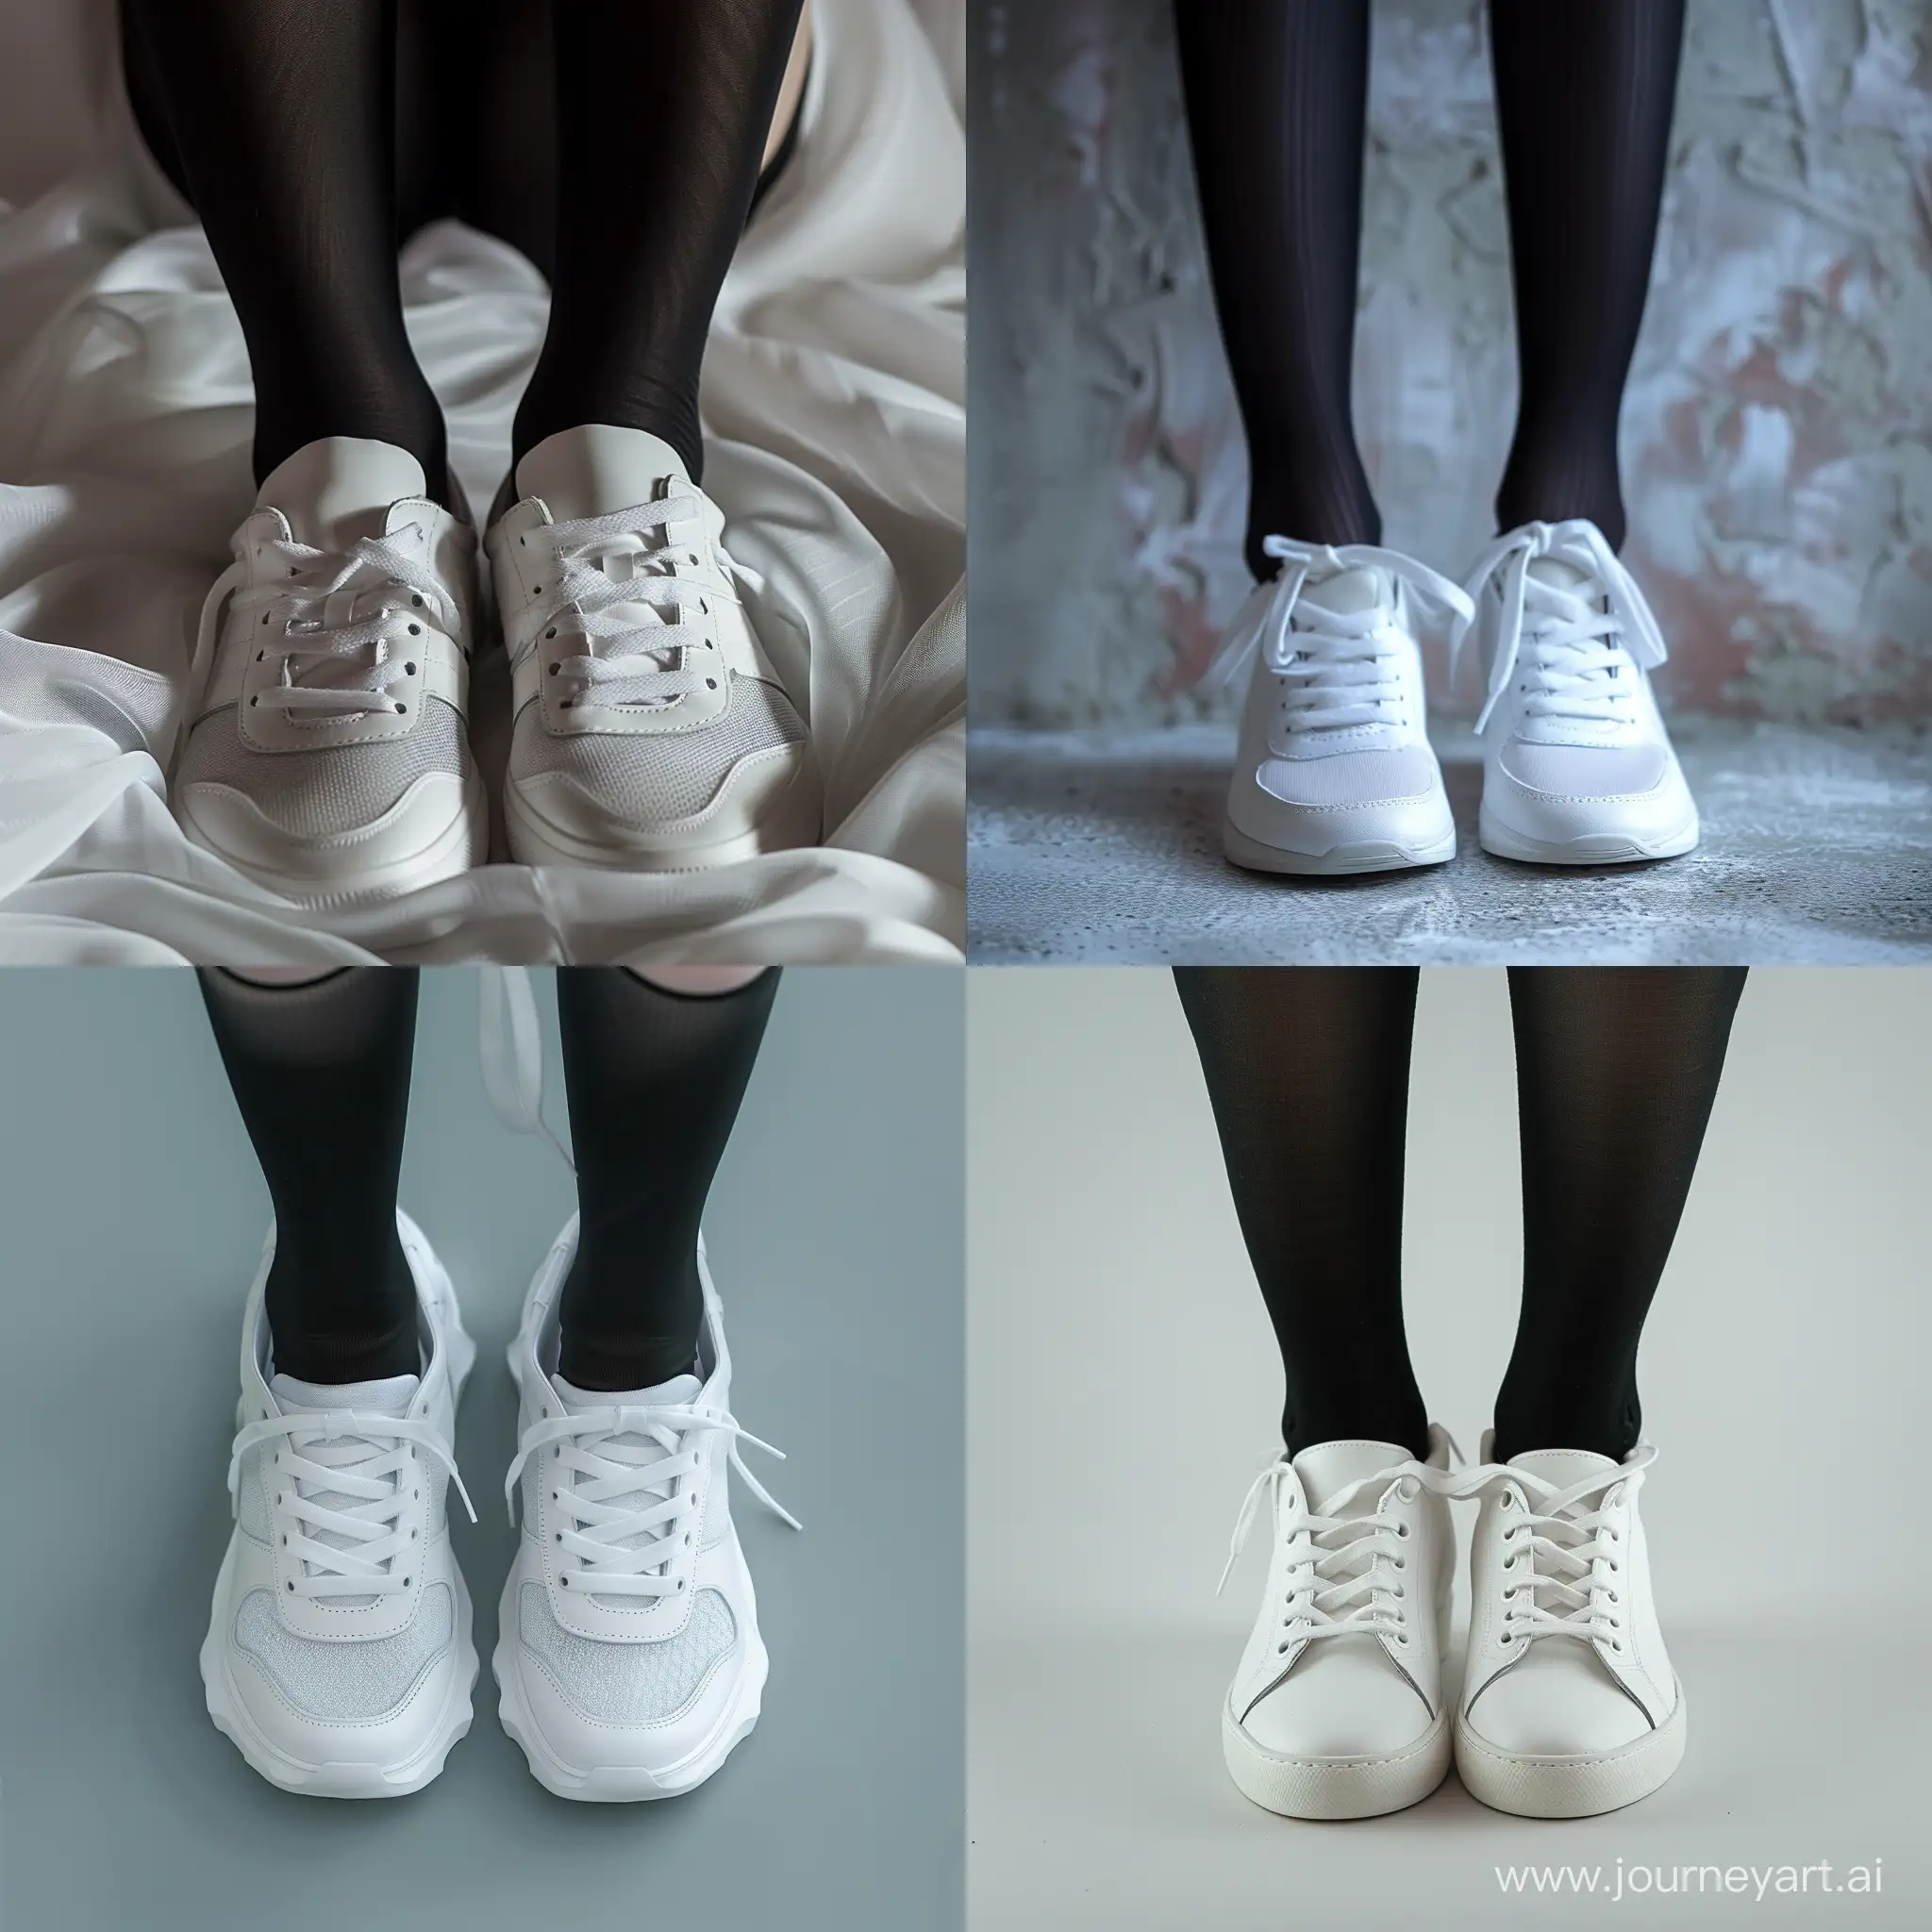 Chic-Teenage-Fashion-HighDetail-4K-Advertising-Photo-of-Stylish-White-Sneakers-and-Black-Tights